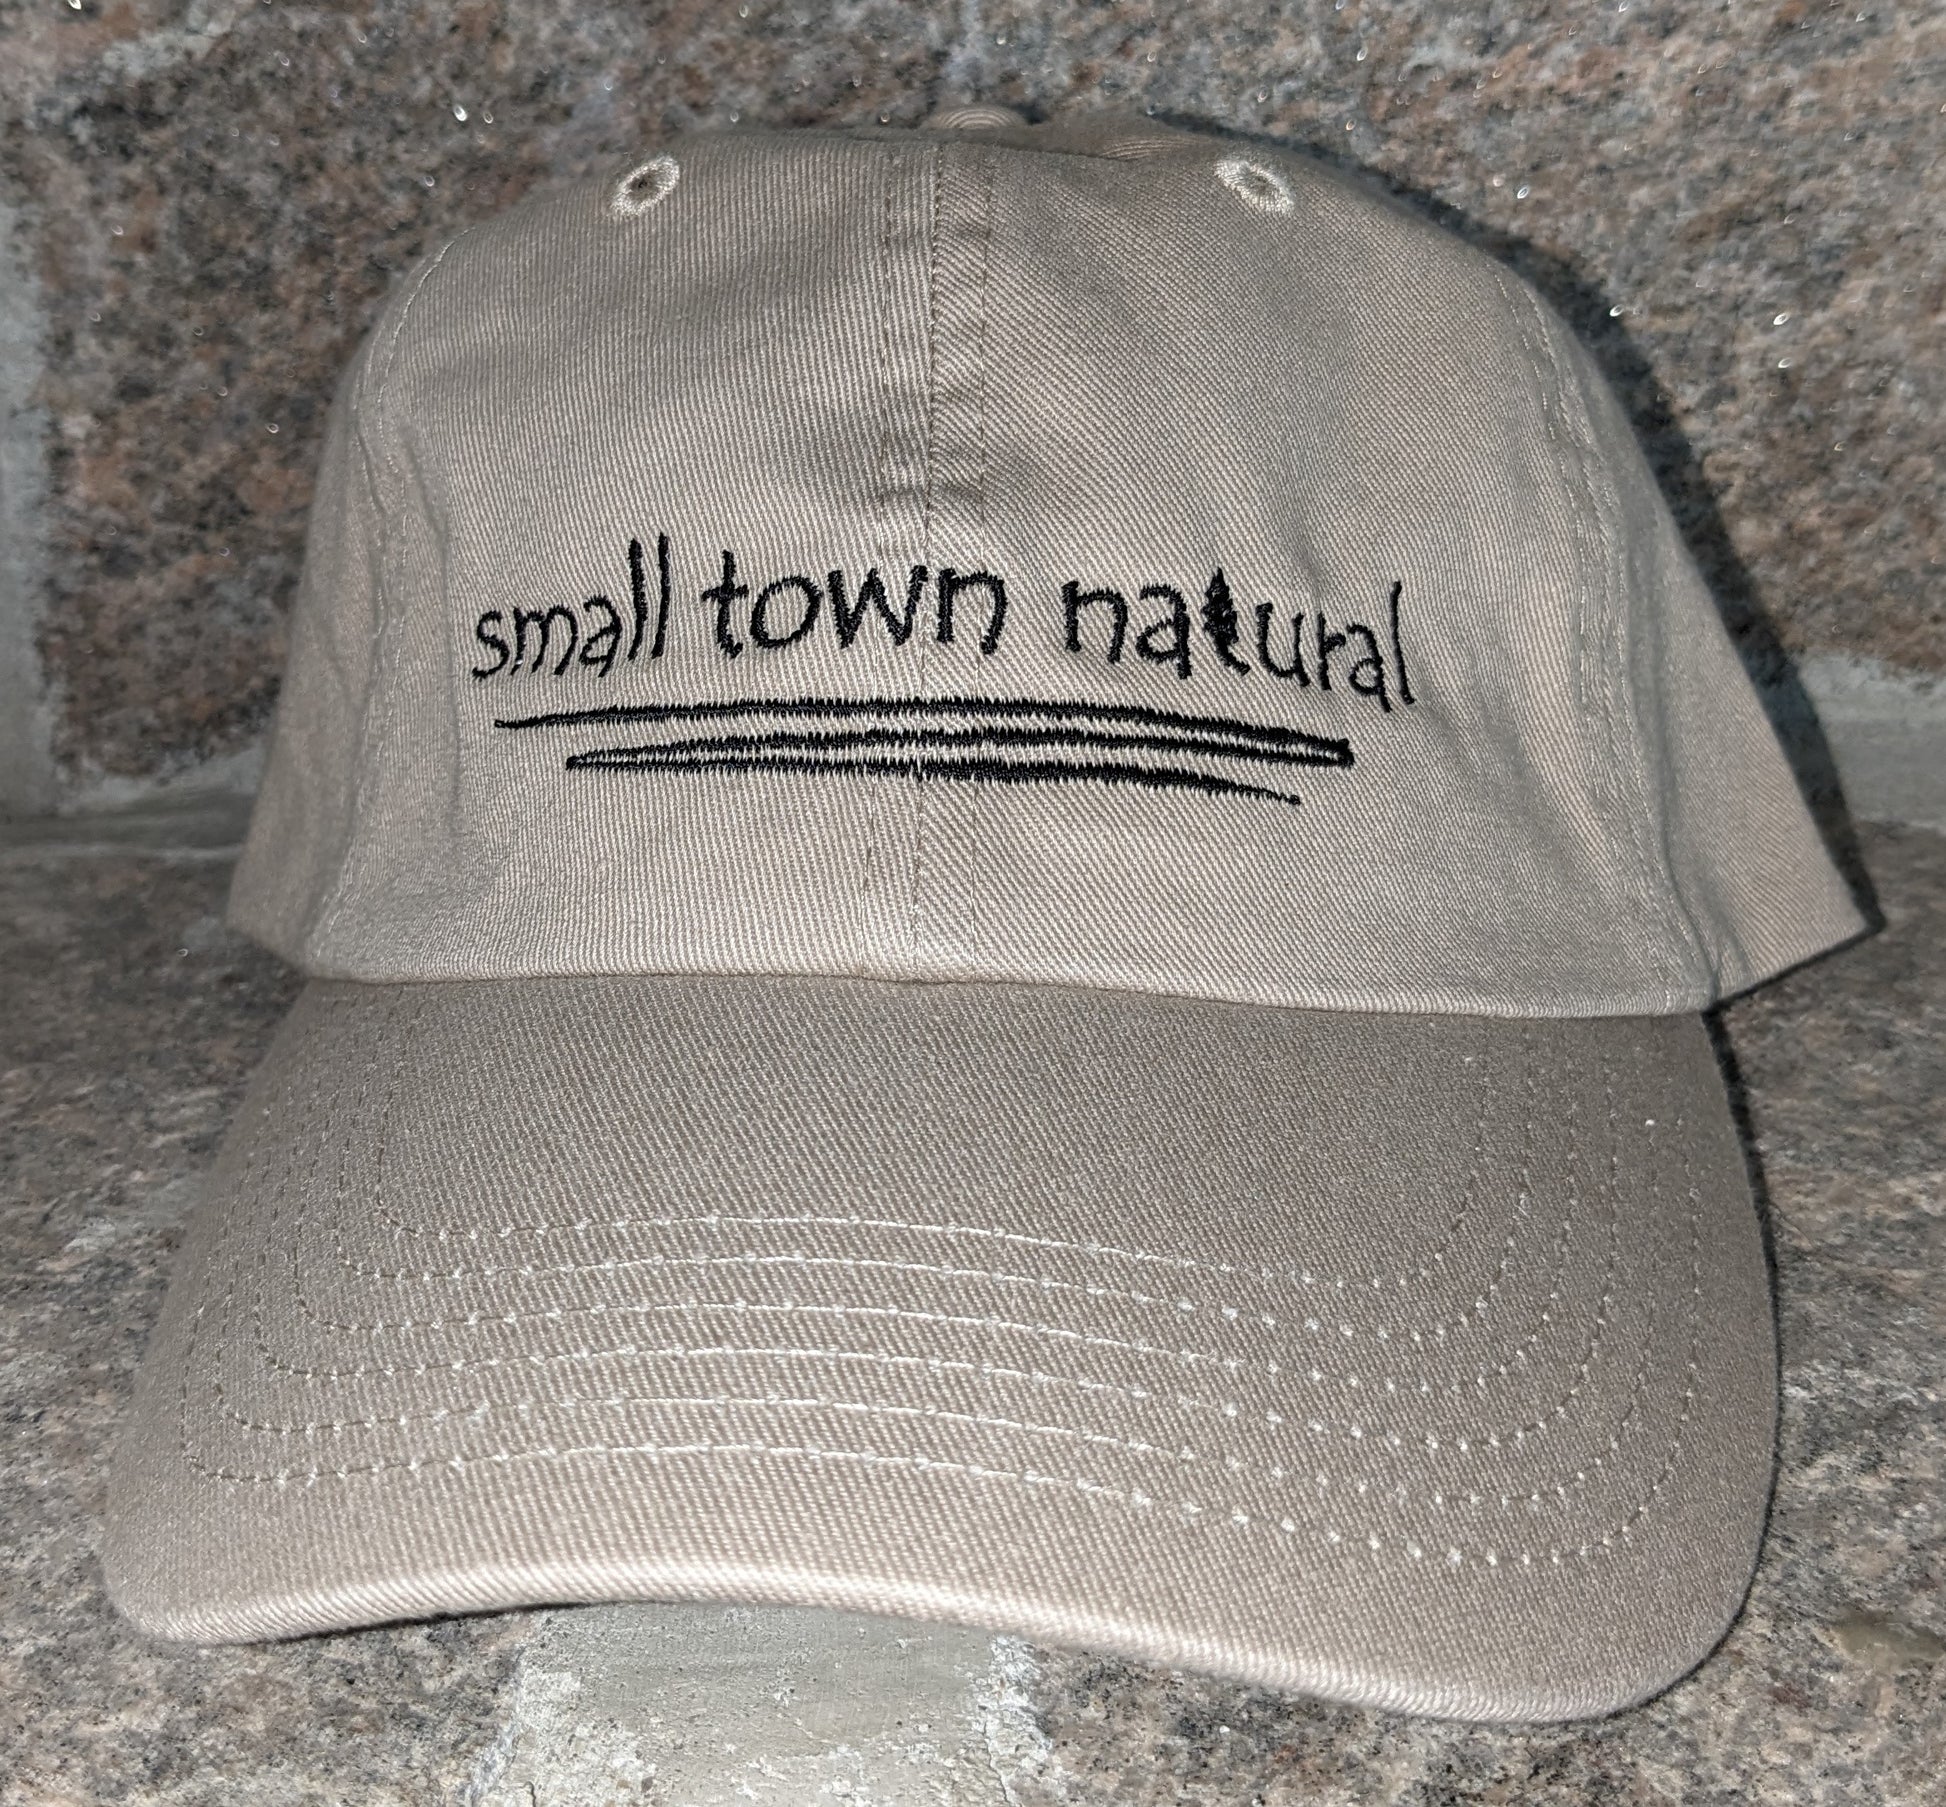 Hat 100% Cotton Small Town Natural ('t' in natural is a tree embroidered graphic of same height as text) is embroidered in plain hand-printed text/font on front of your choice of sand or baby blue hathat in black thread (on black hat thread is light grey) with a thin zigzag line under text representing winding river / creek)